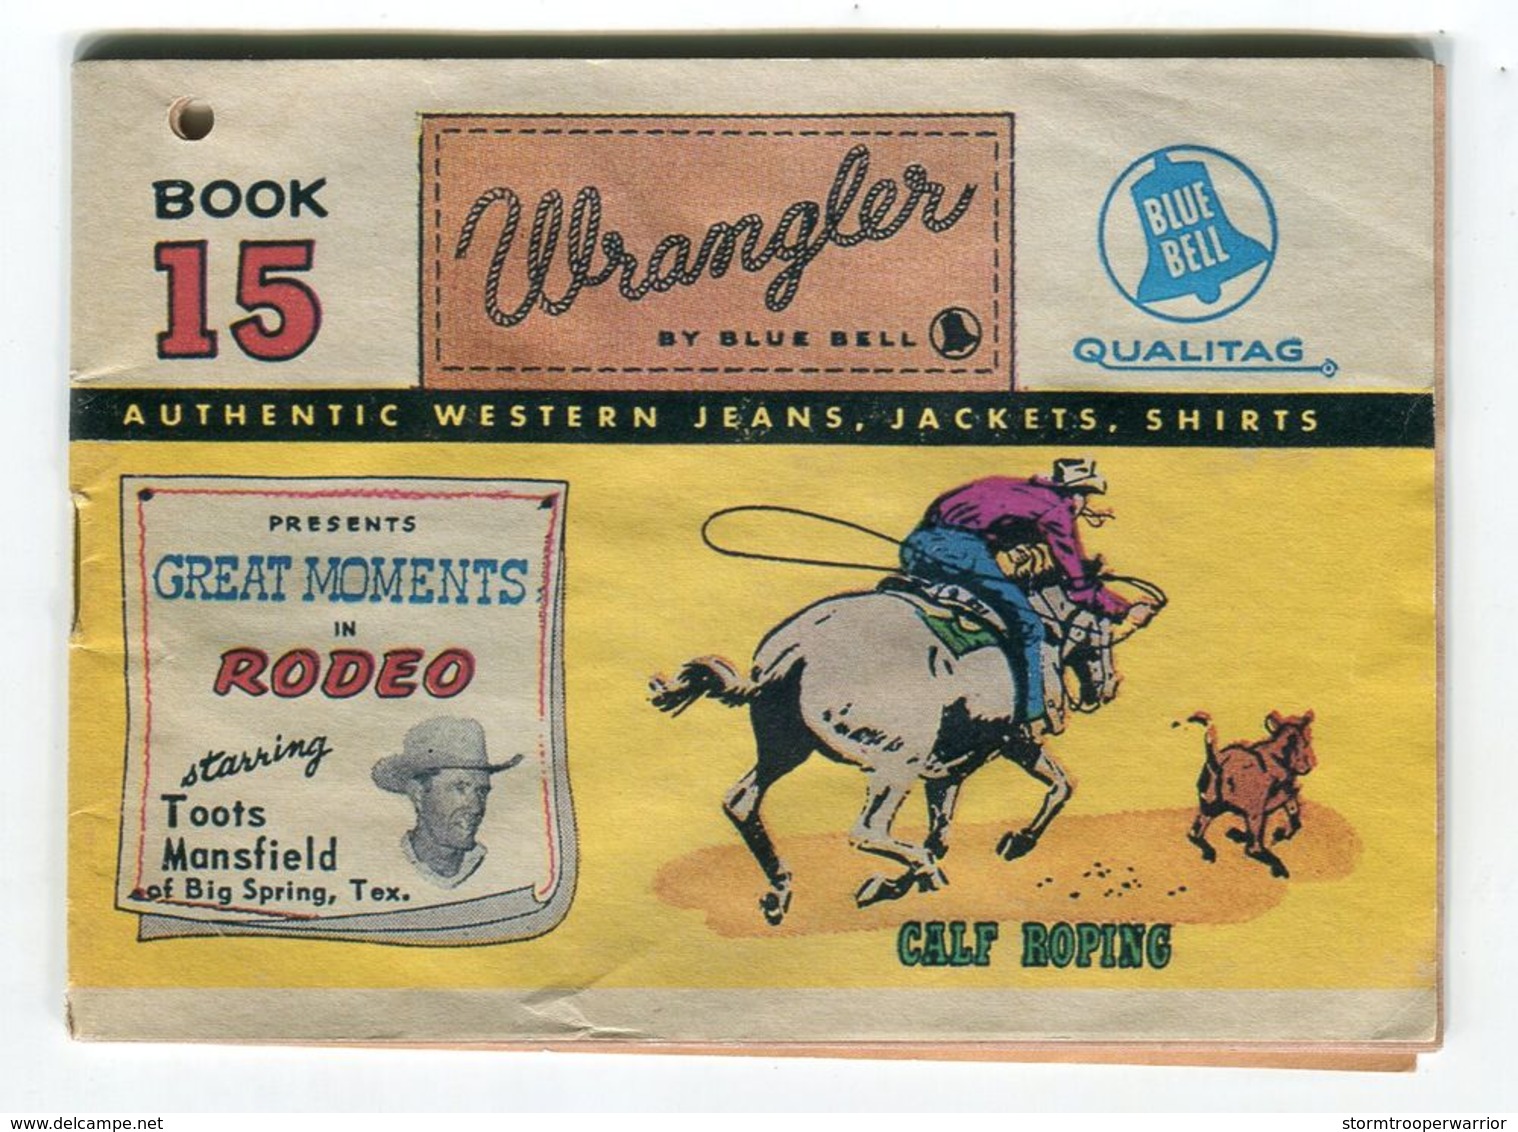 USA - WRANGLER RODEO SERIES By Blue Bell - N°15 -  STARRING Toots Mansfield - Other Publishers